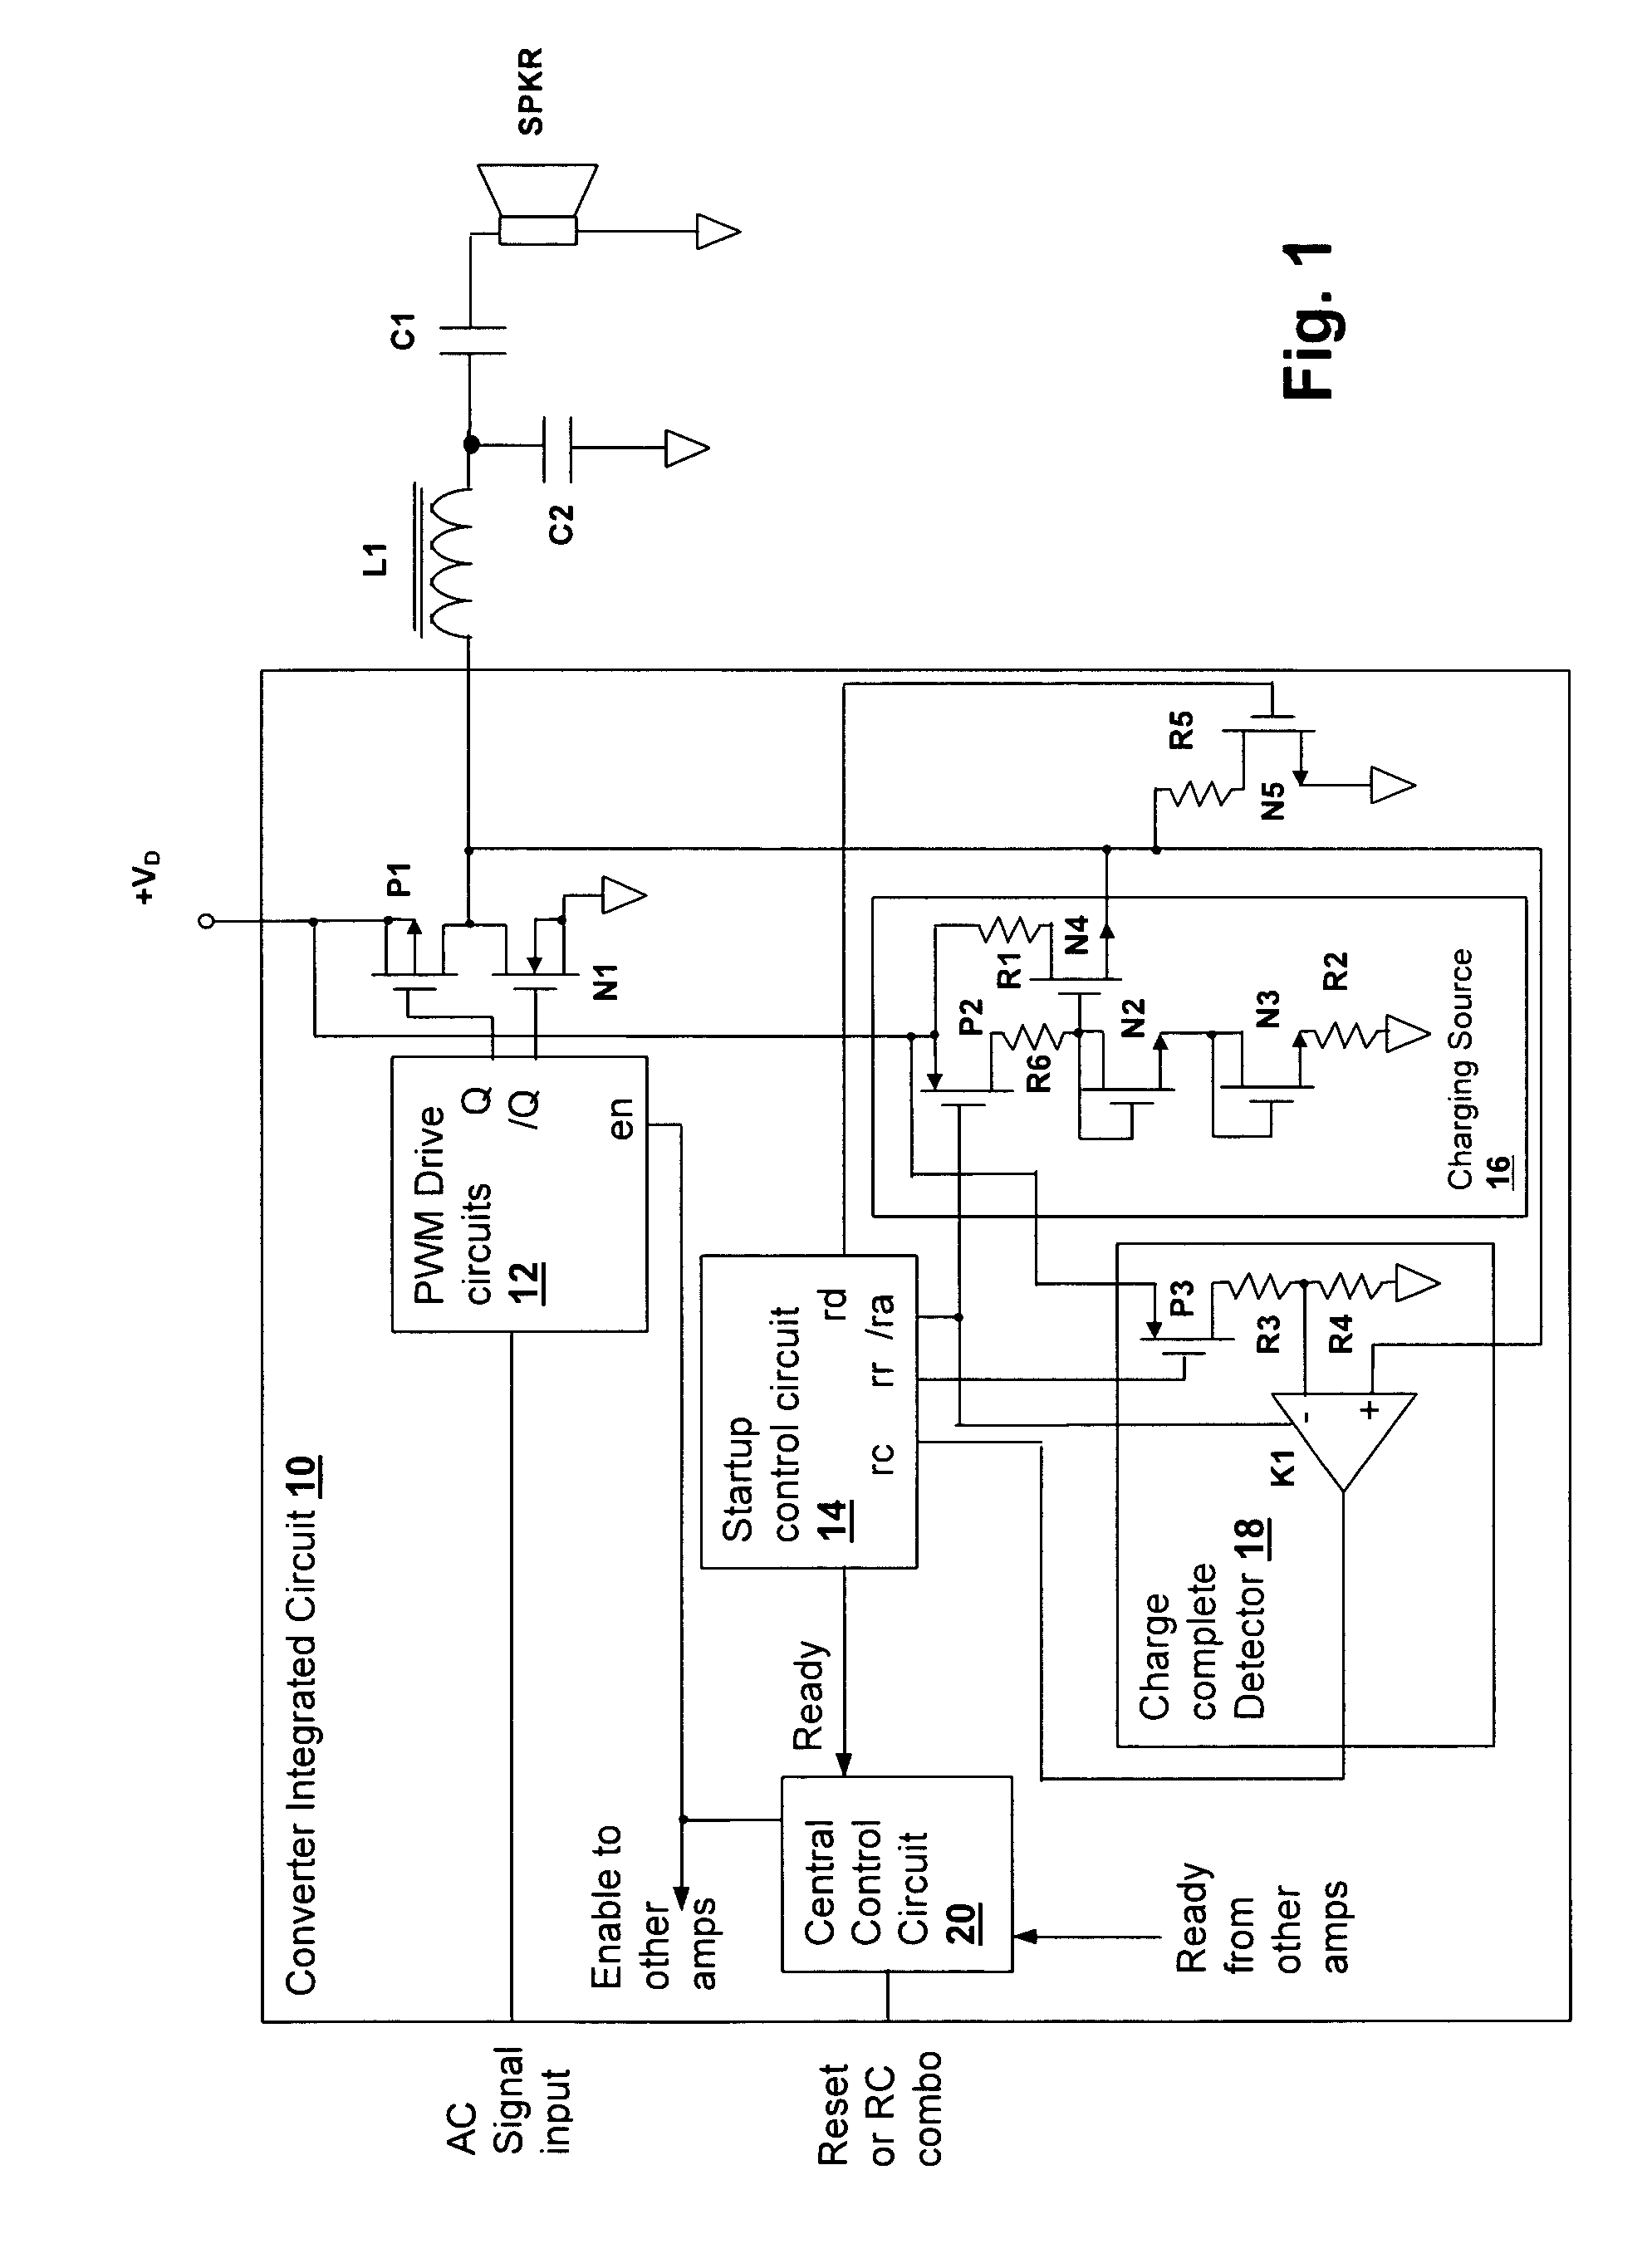 Pre-charge apparatus and method for controlling startup transients in a capacitively-coupled switching power stage